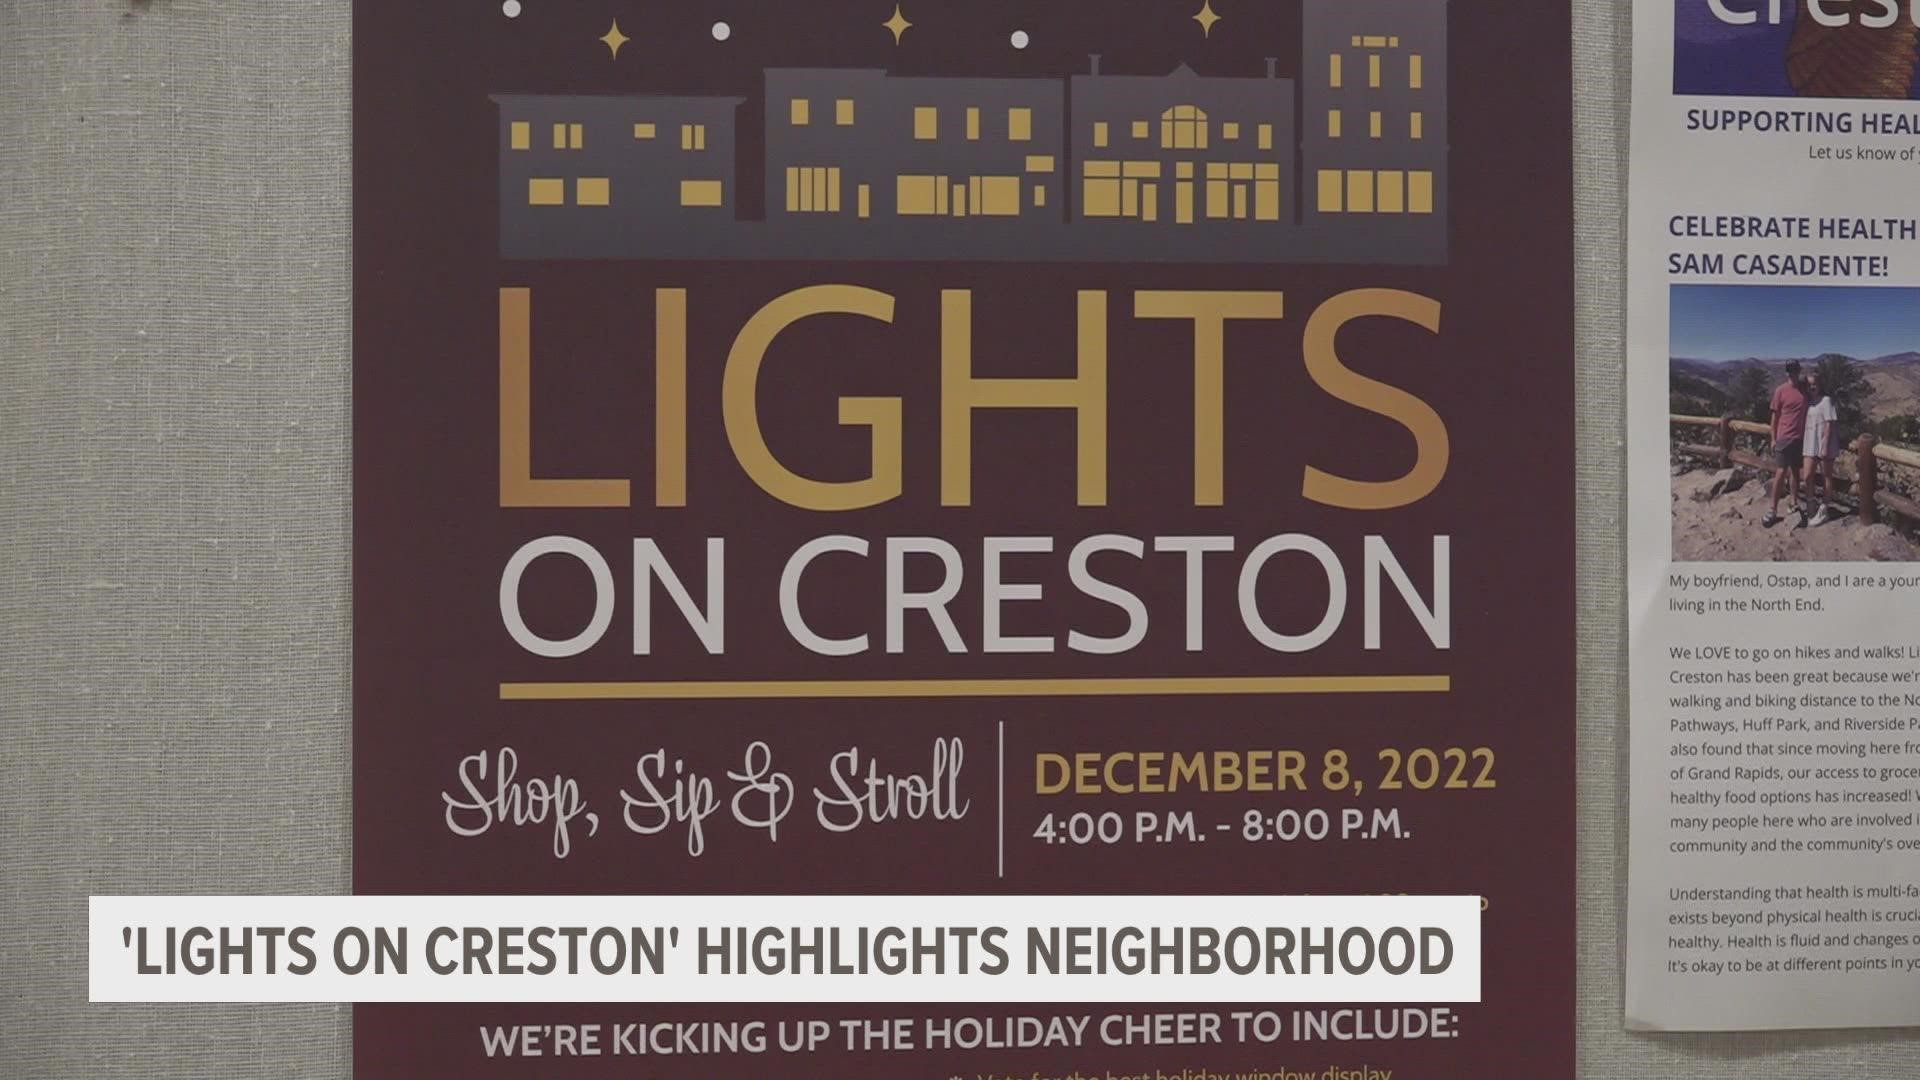 The Creston Neighborhood in Grand Rapids was busy with activity Thursday night as people shopped small ahead of the holidays.